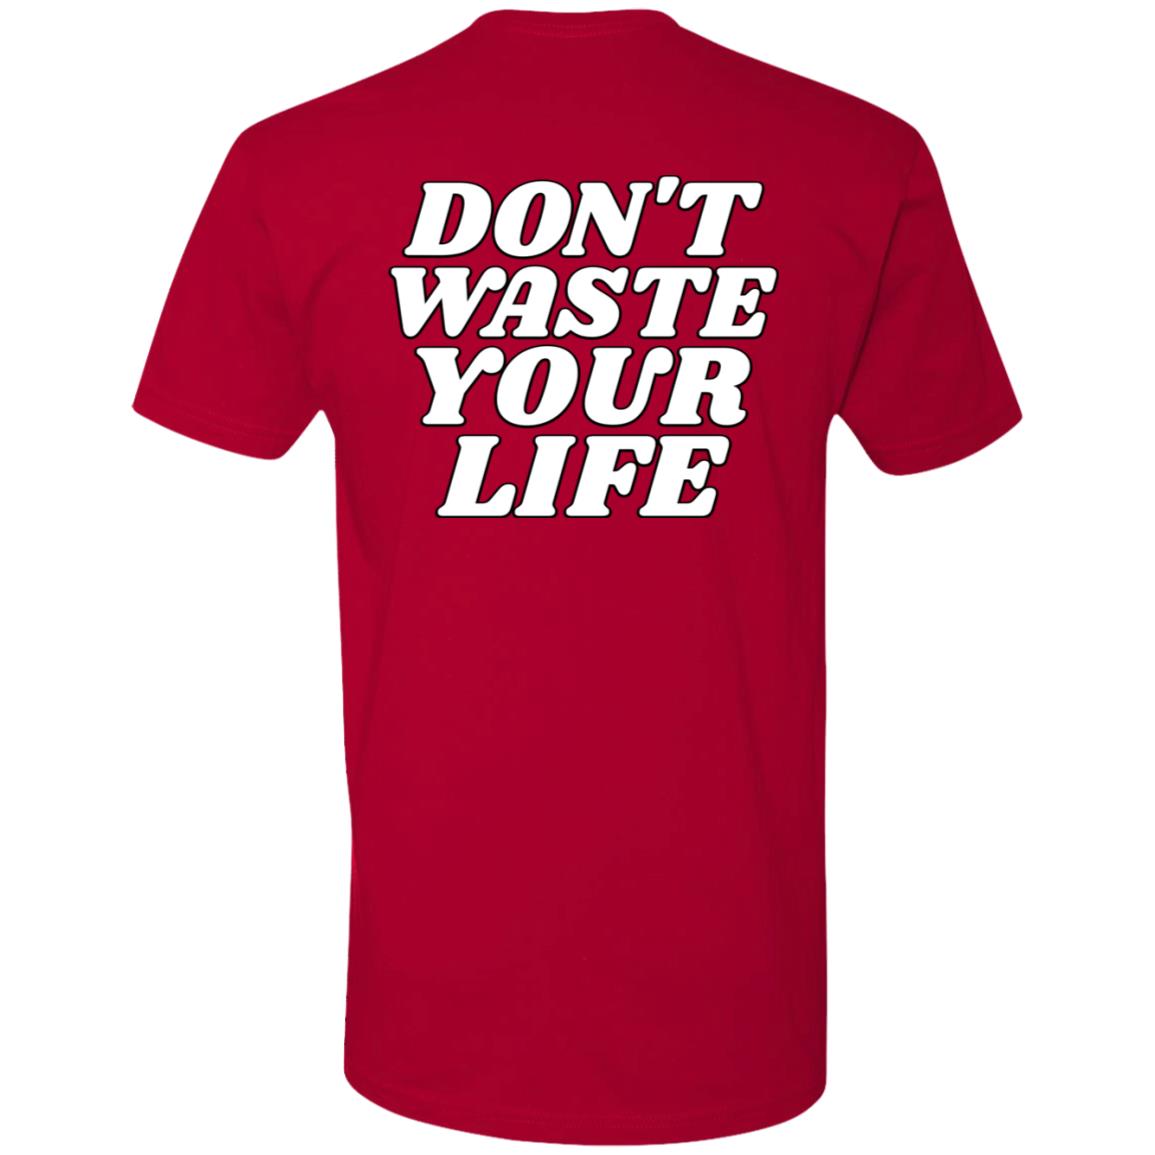 Don't Waste Your Life (Unisex Tee)